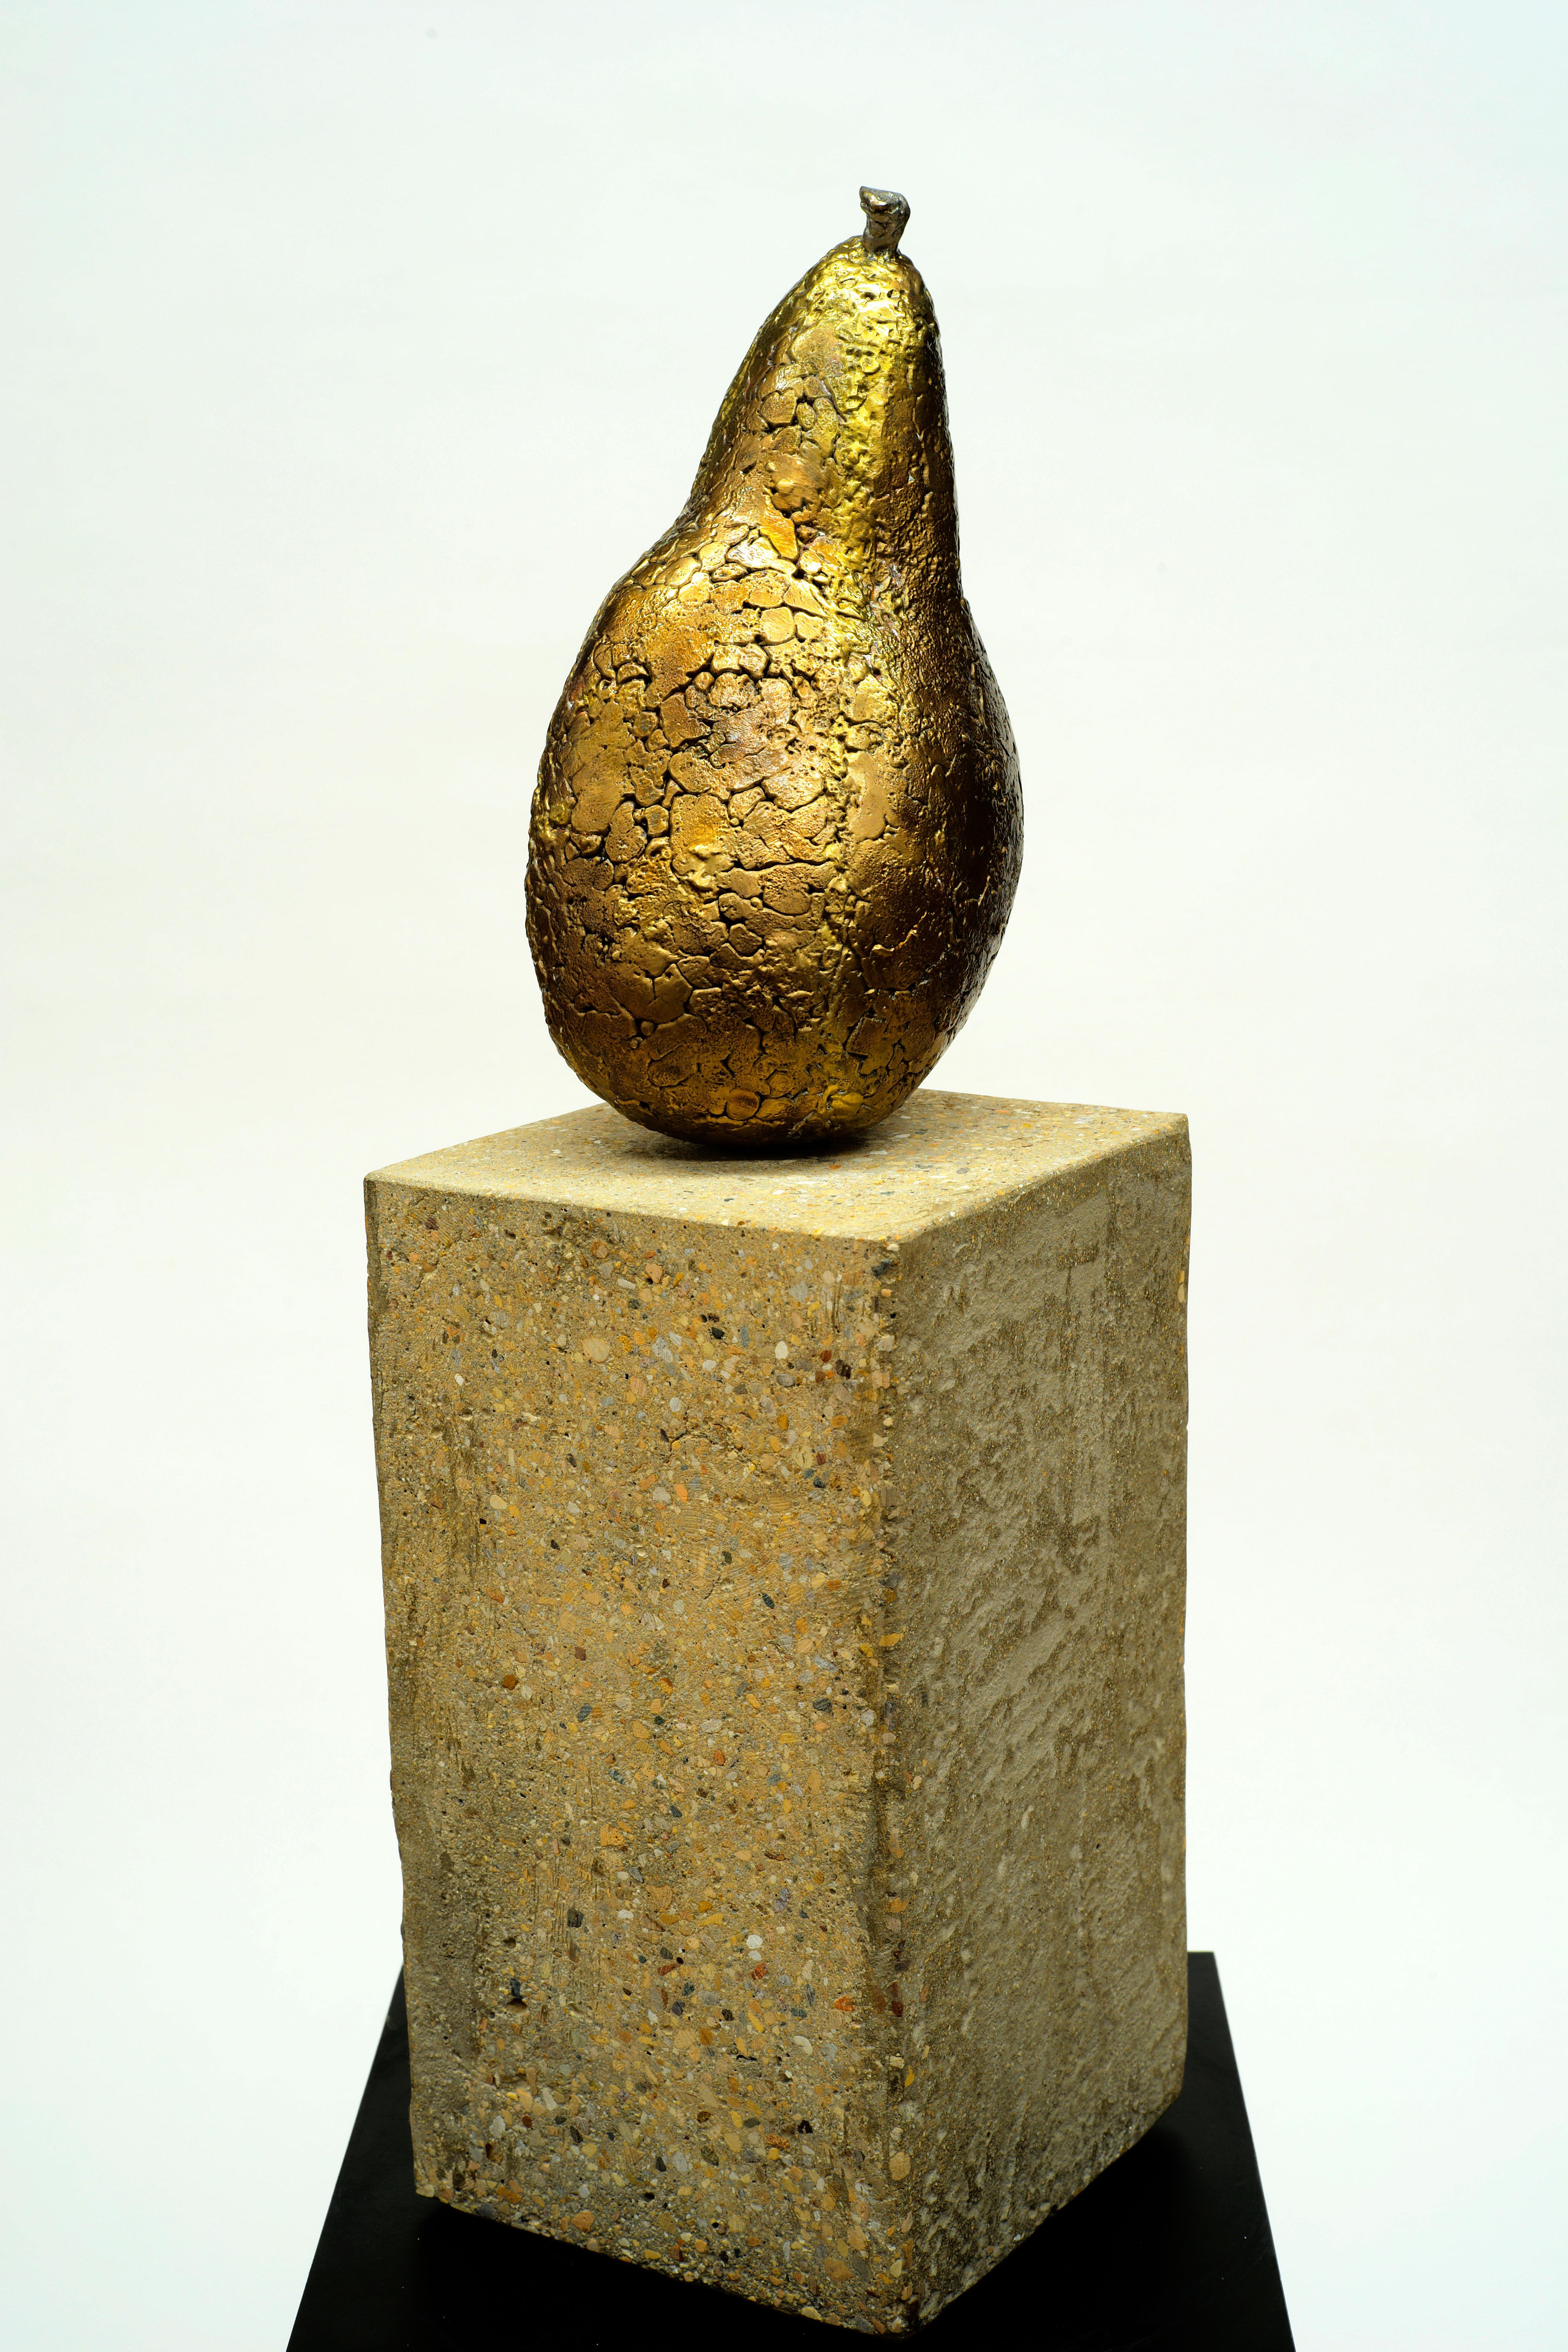 Hand-Crafted Autumn Pear, Bronze Sculpture with Textured Golden Surface on Concrete Base For Sale